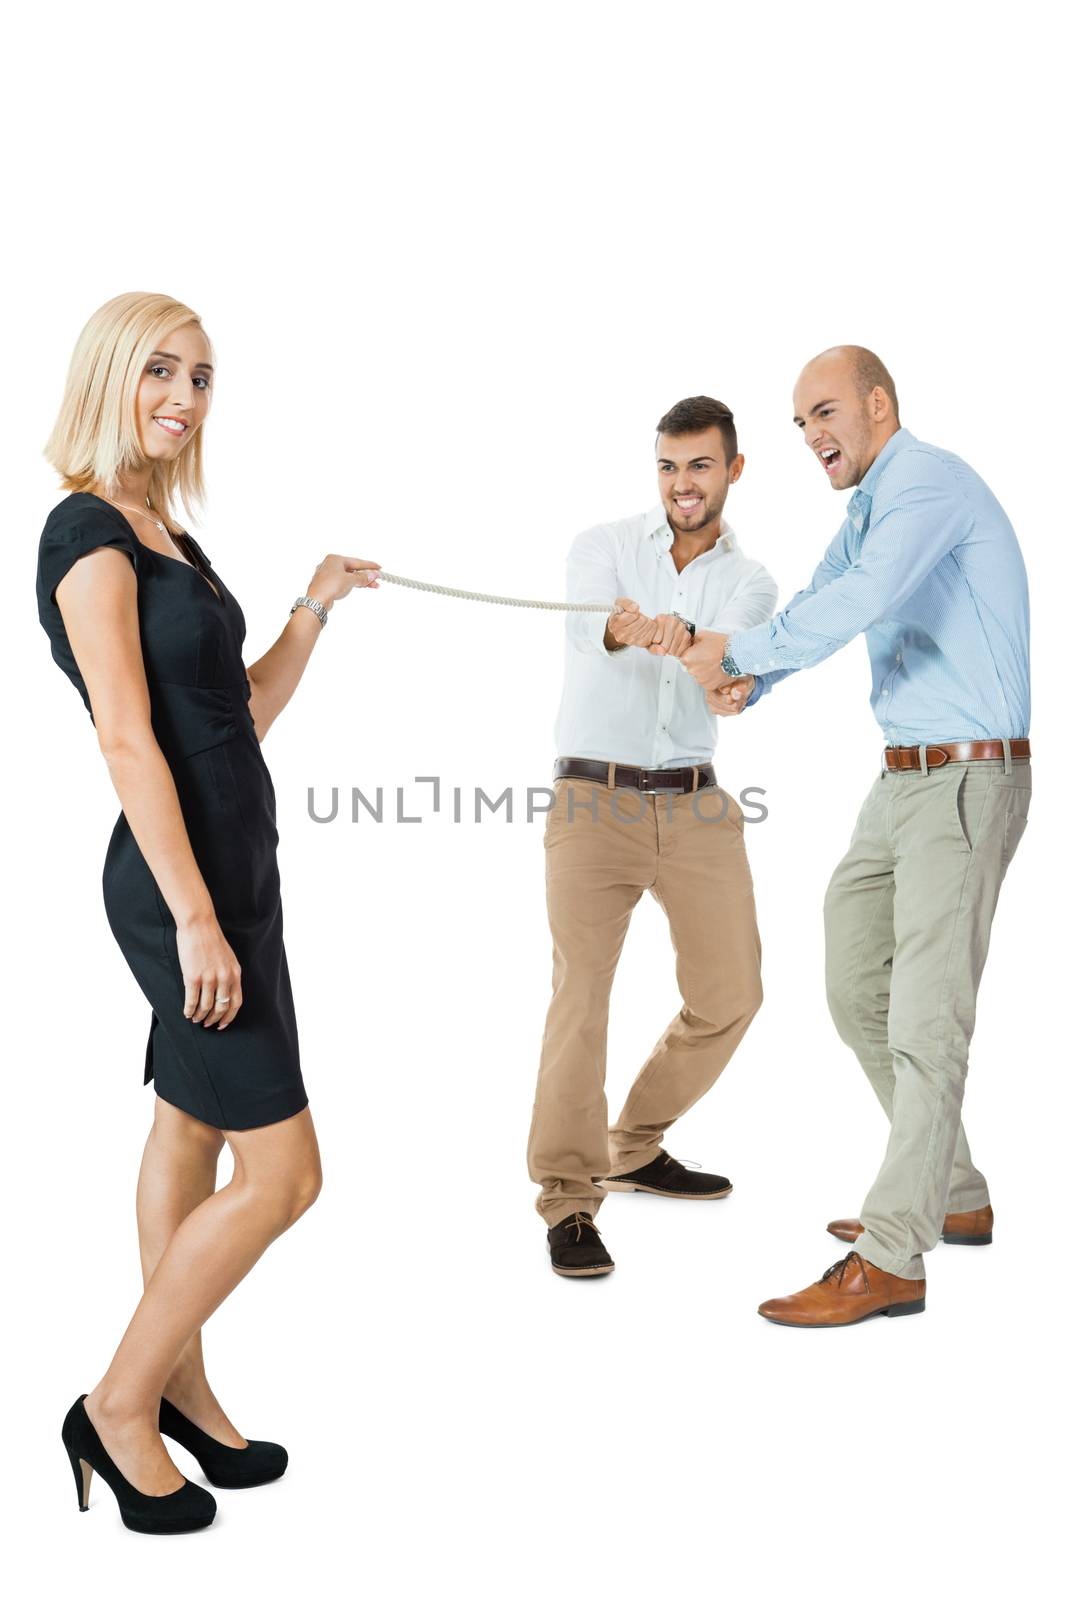 Beautiful strong fit woman demonstrating her dominance in a tug of war with two men pulling as hard as they can on the end of a rope she is holding while she remains nonchalant and glamorous, on white